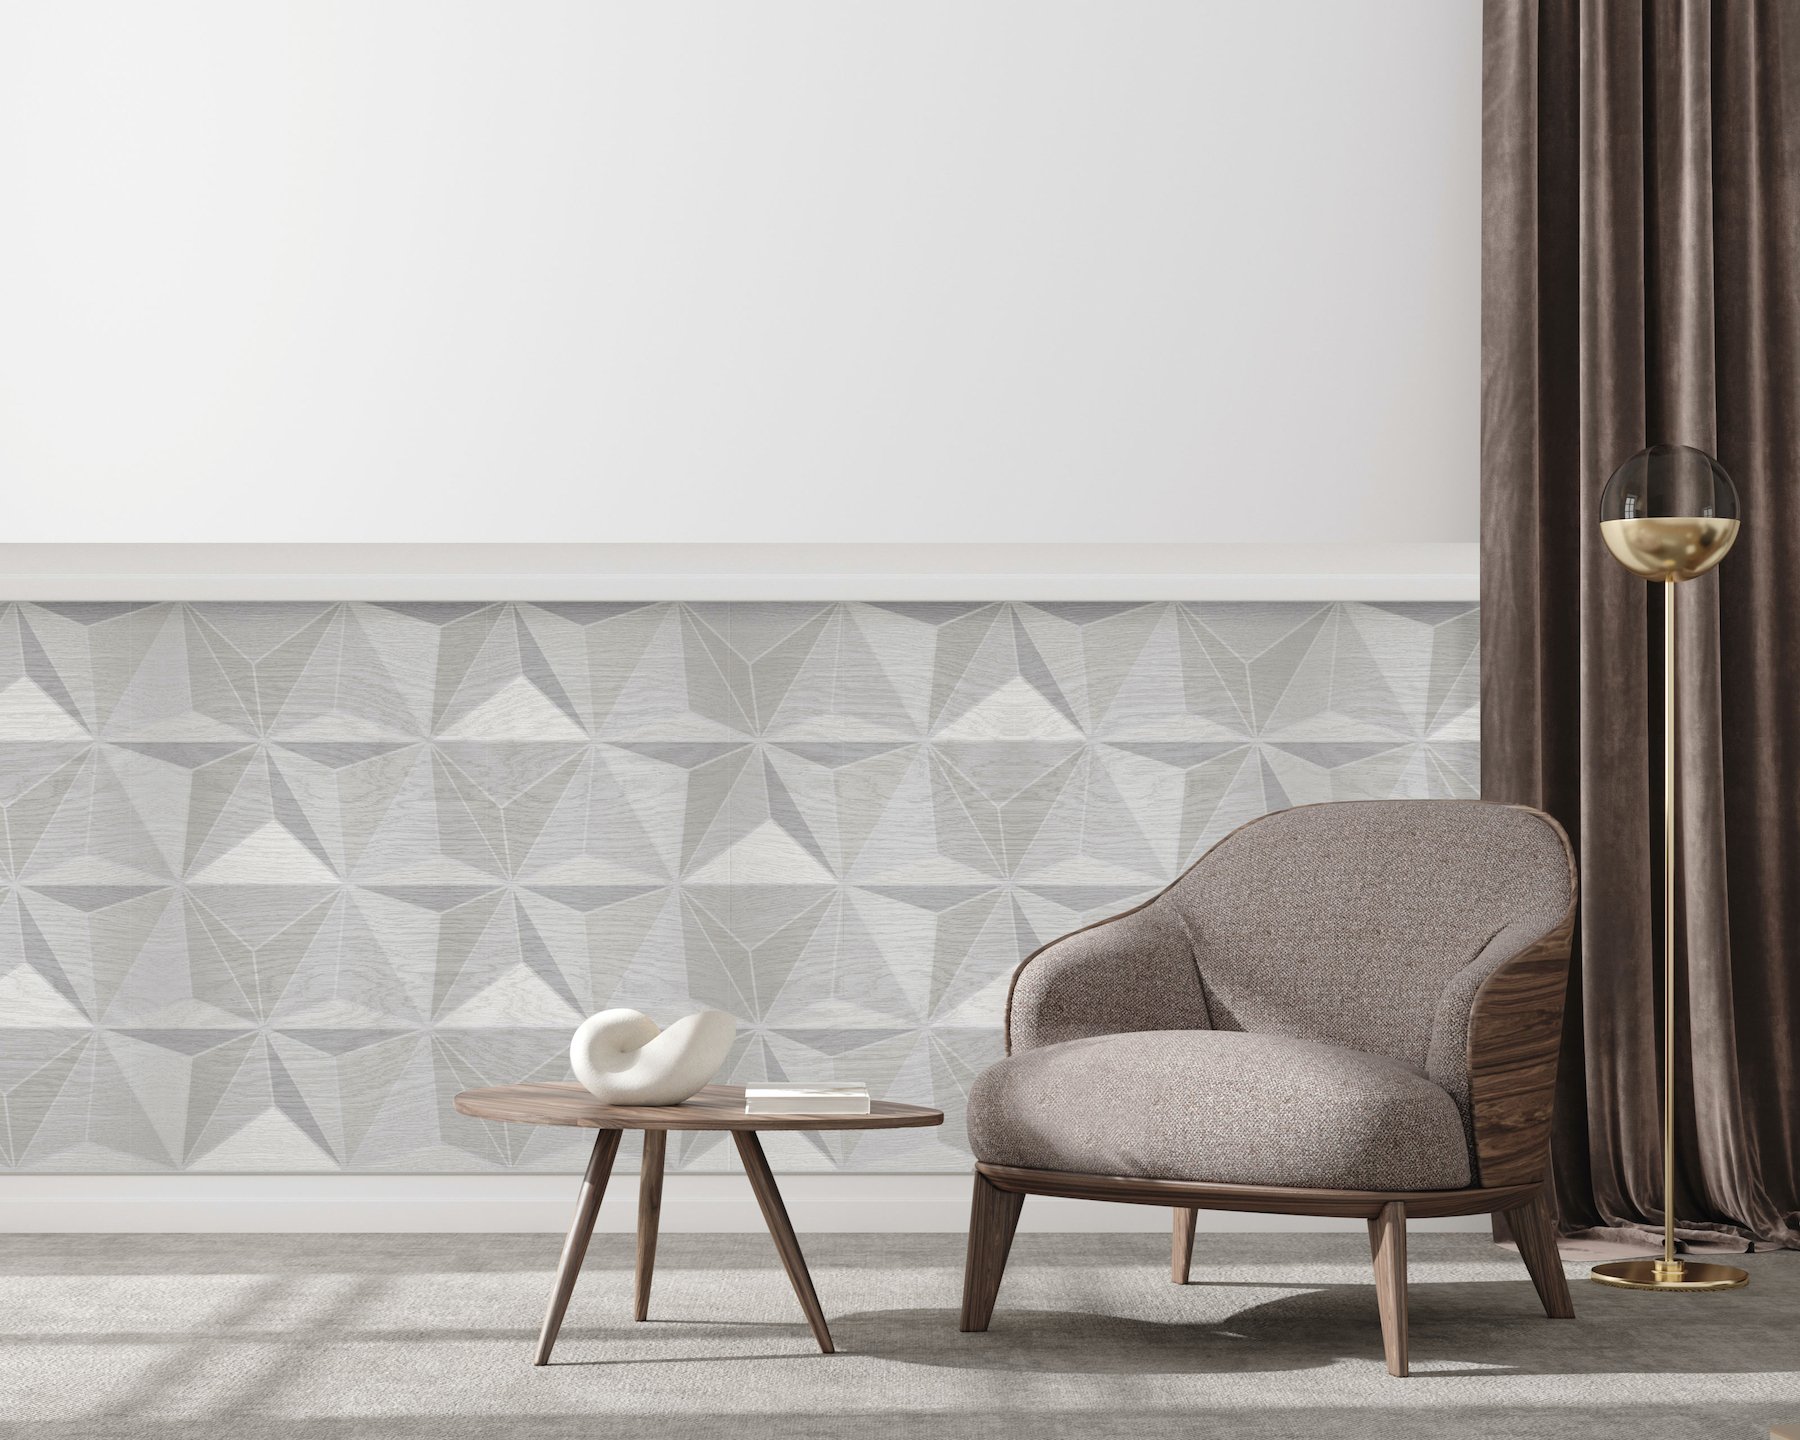 Pyramid 3D Wall Panels (EDGE Series) in 'Snow White' on Oak